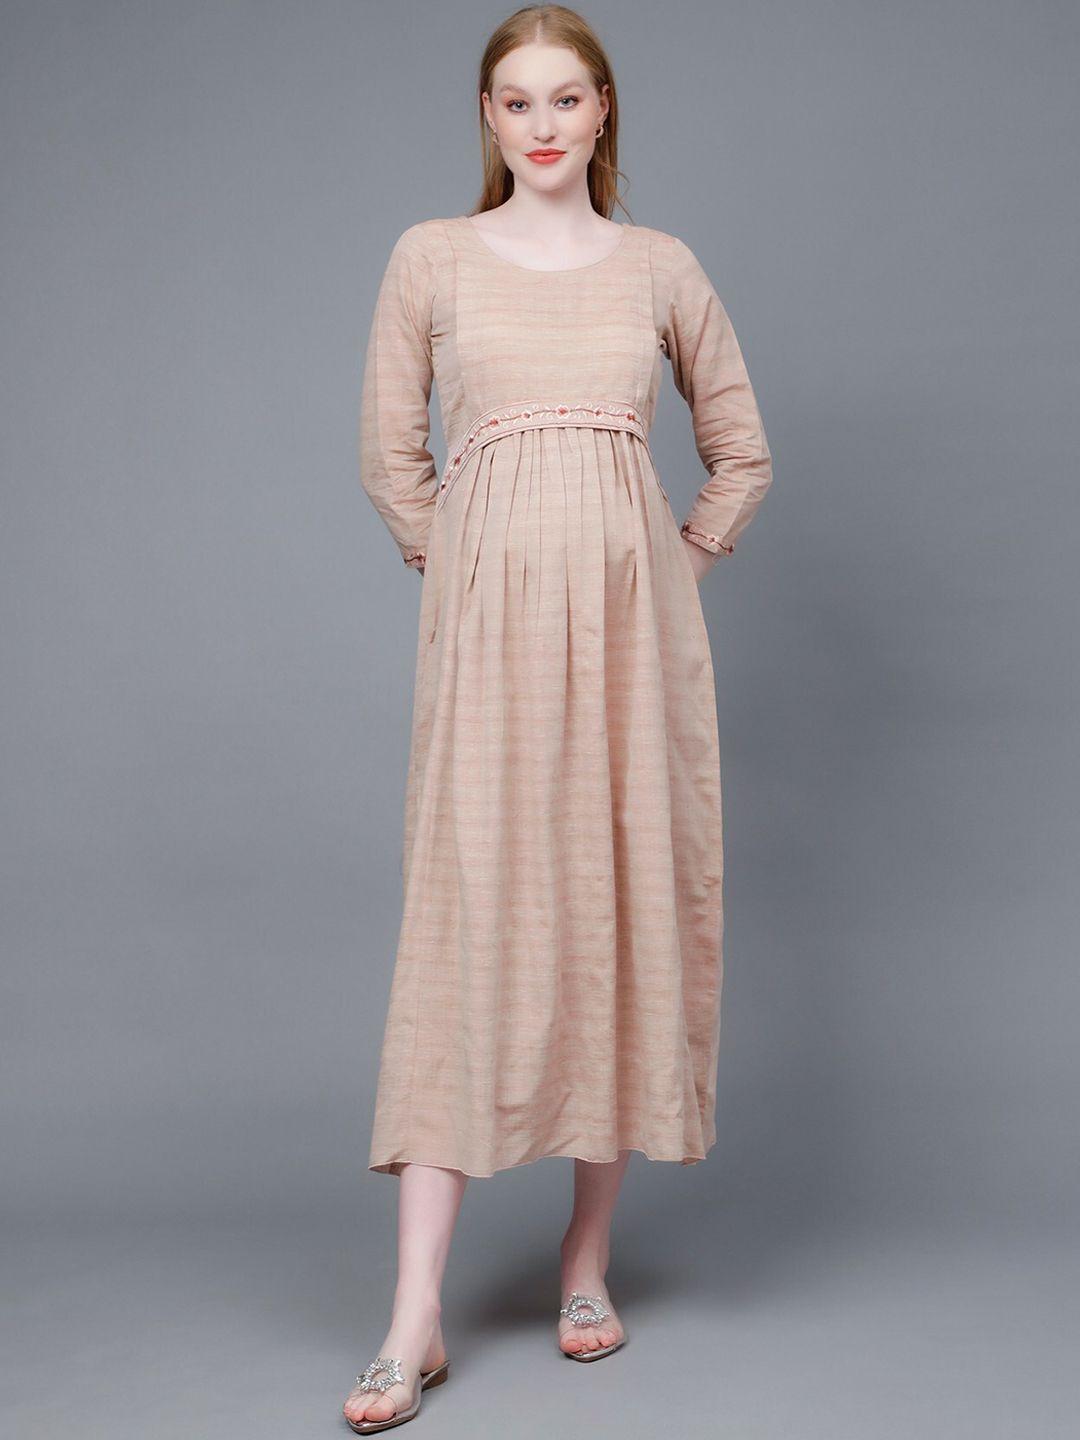 dummy shape floral embroidered pure cotton a-line maternity dress